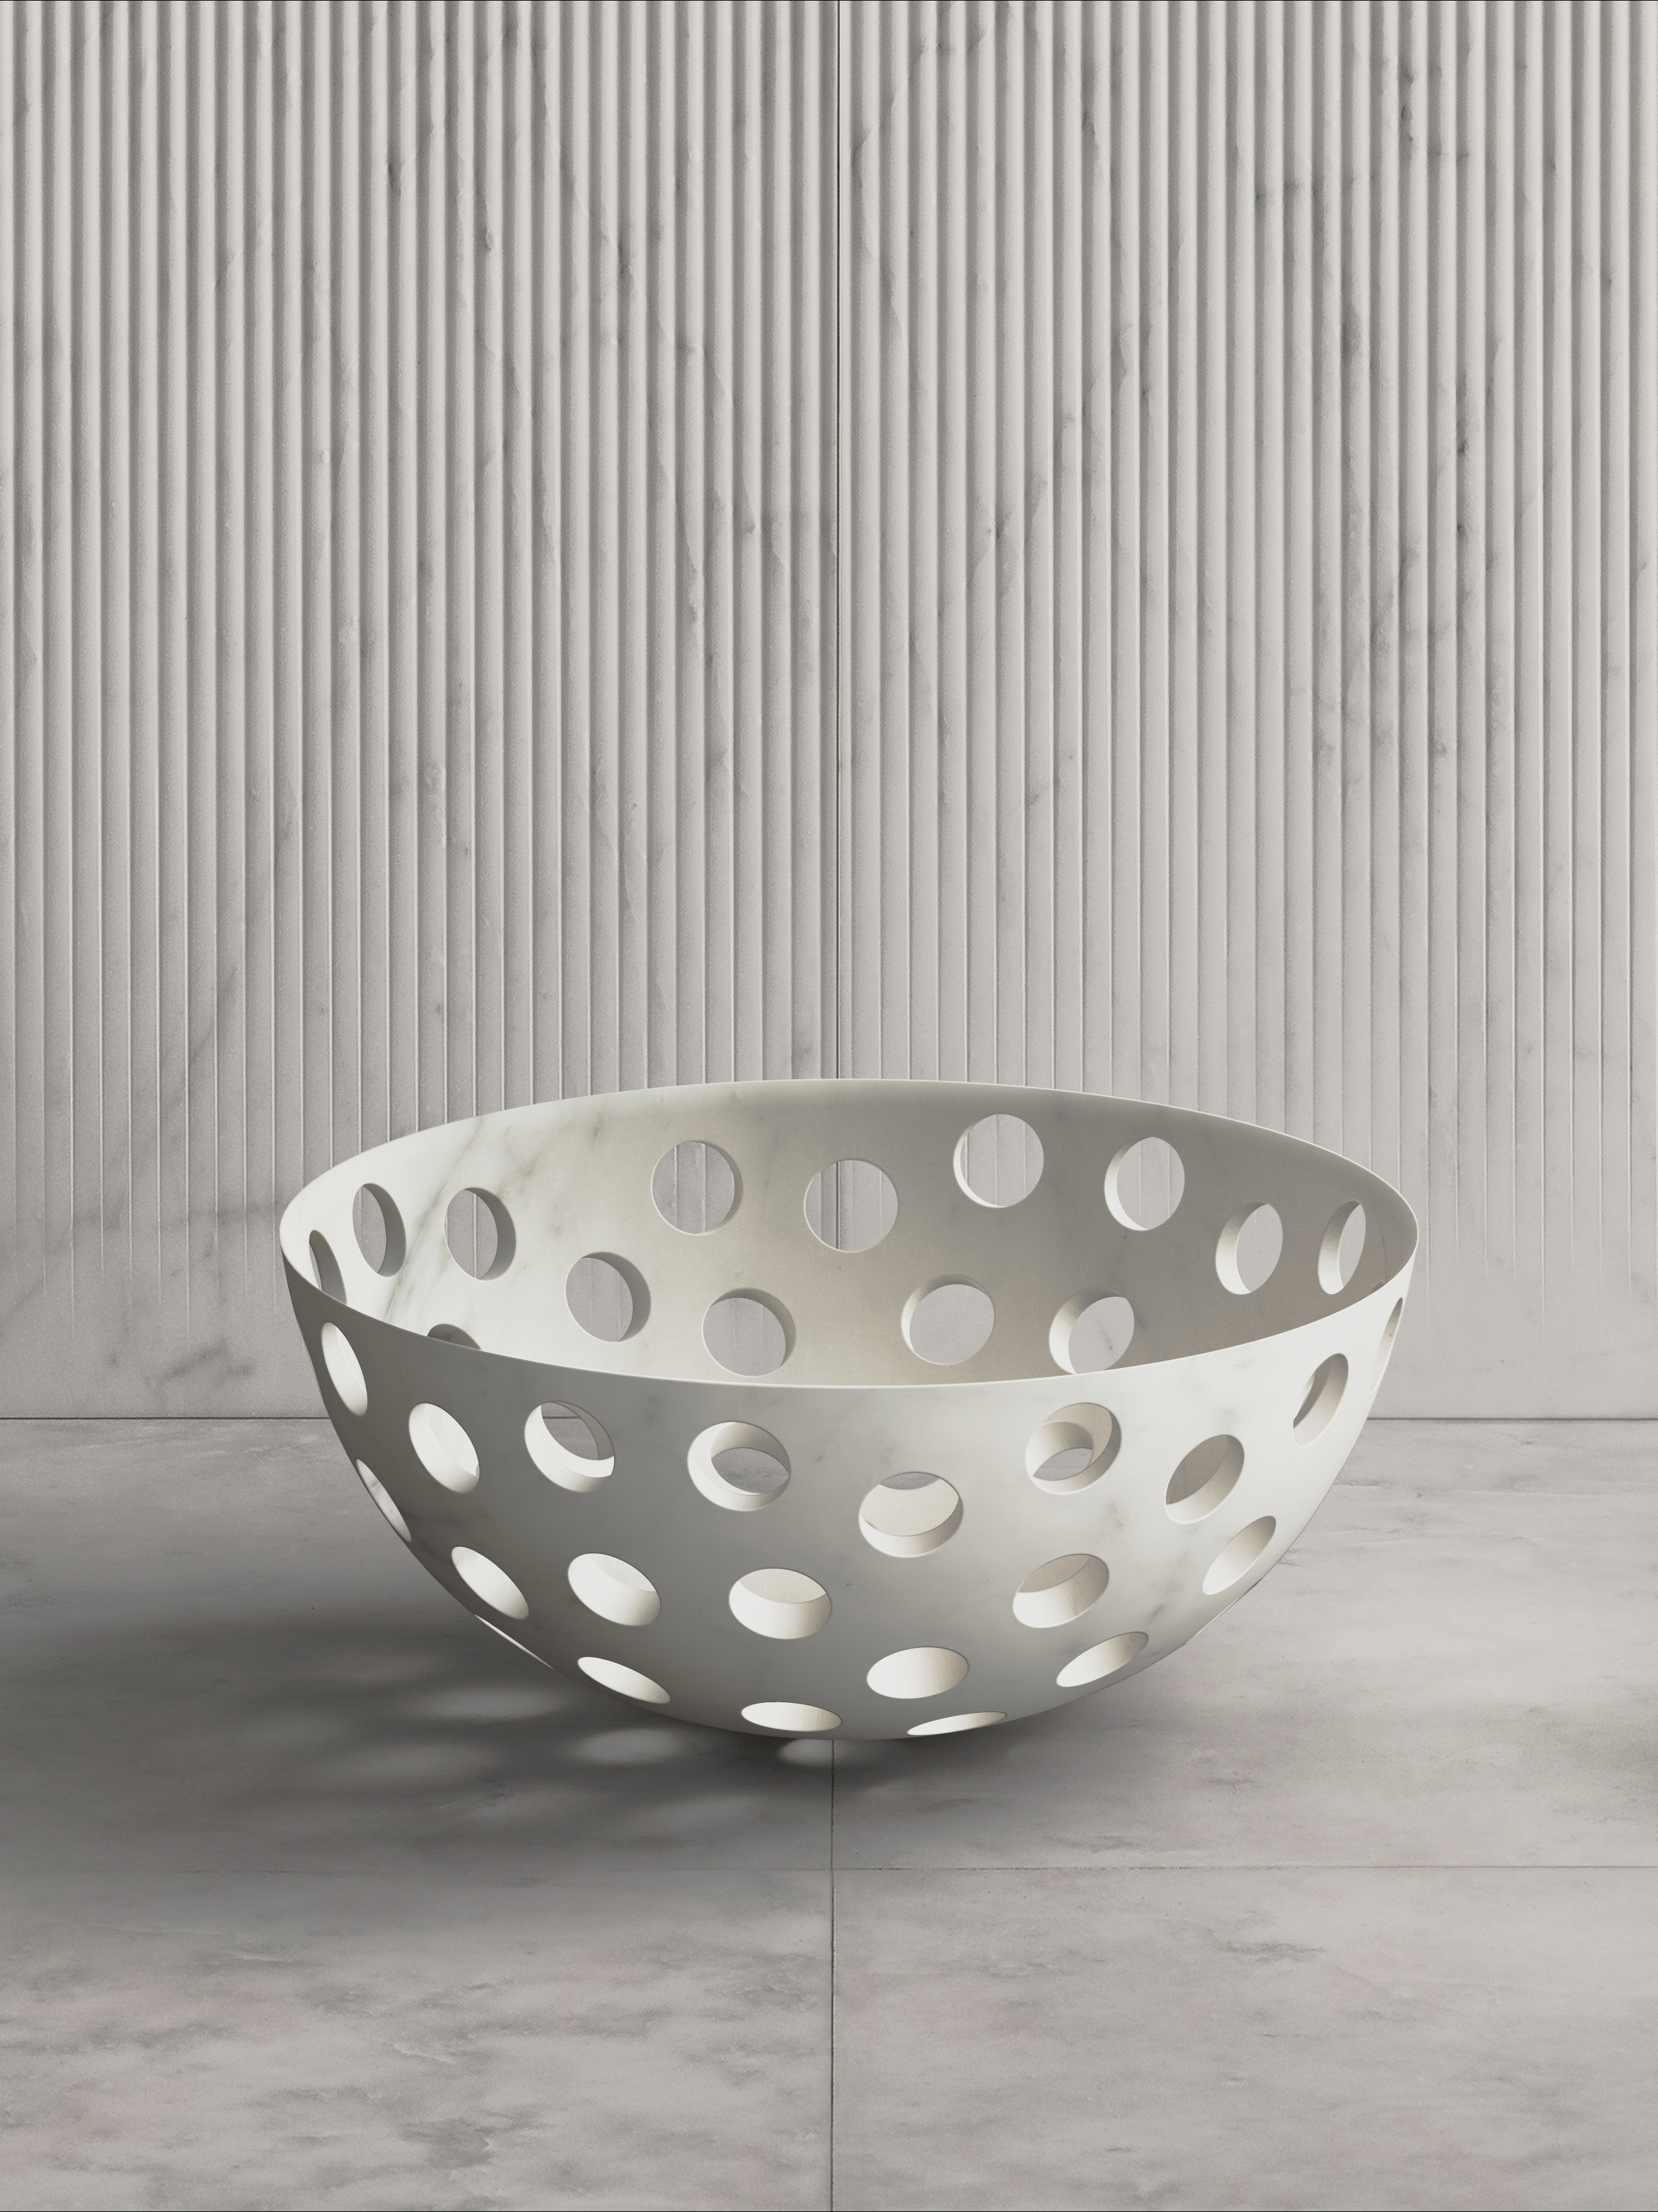 Cermaic bowl with holes in it